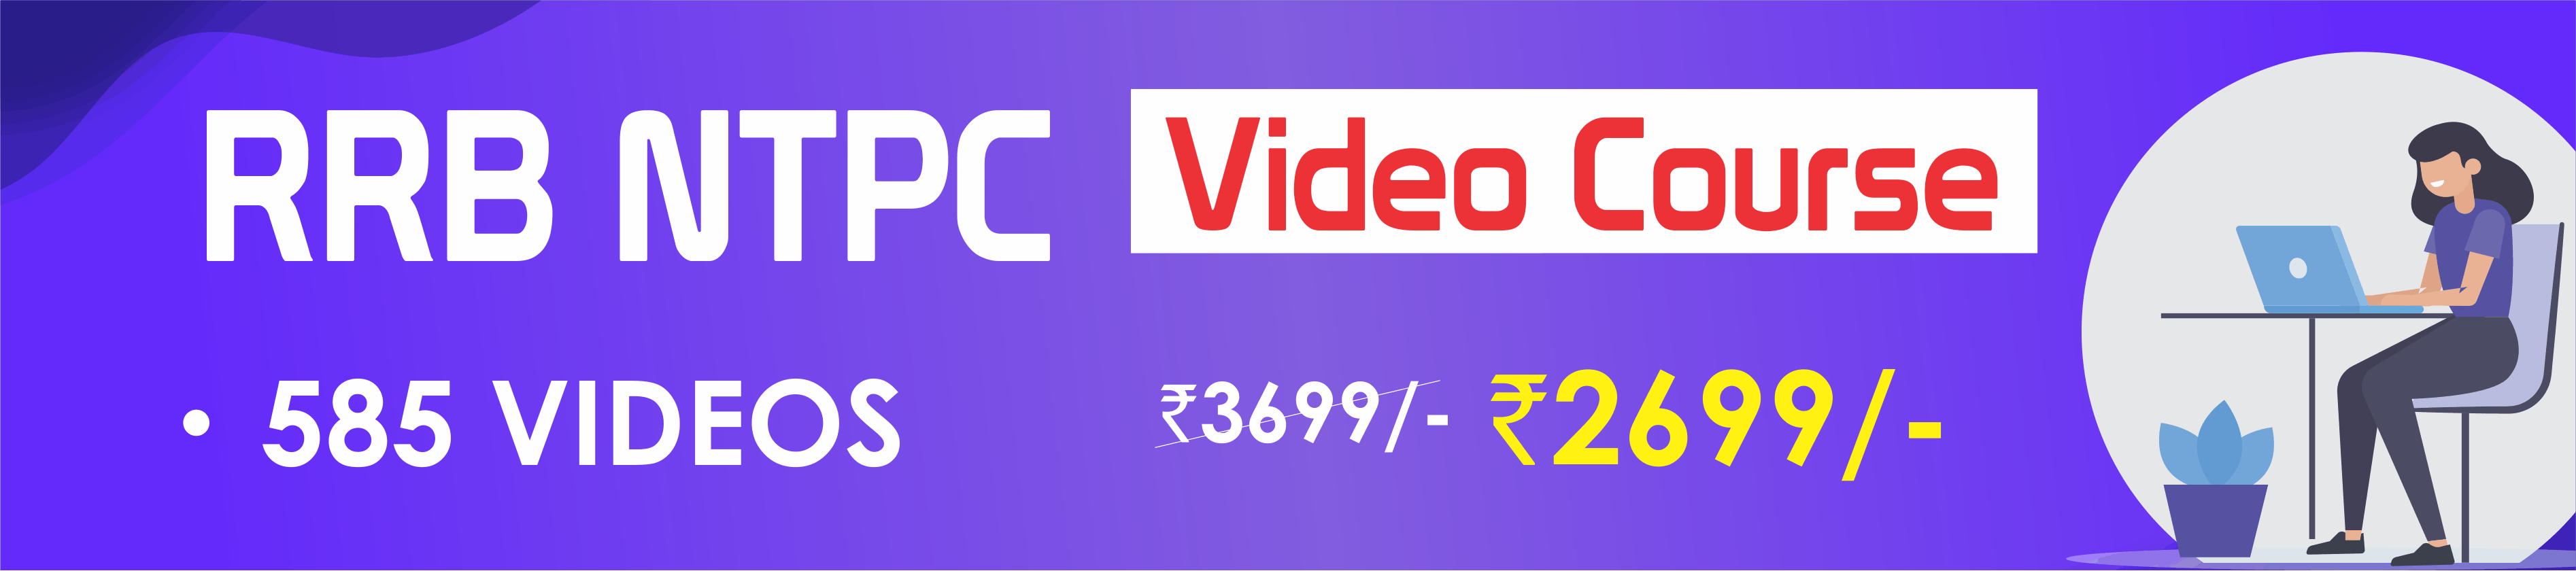 RRB NTPC VIDEO COURSE